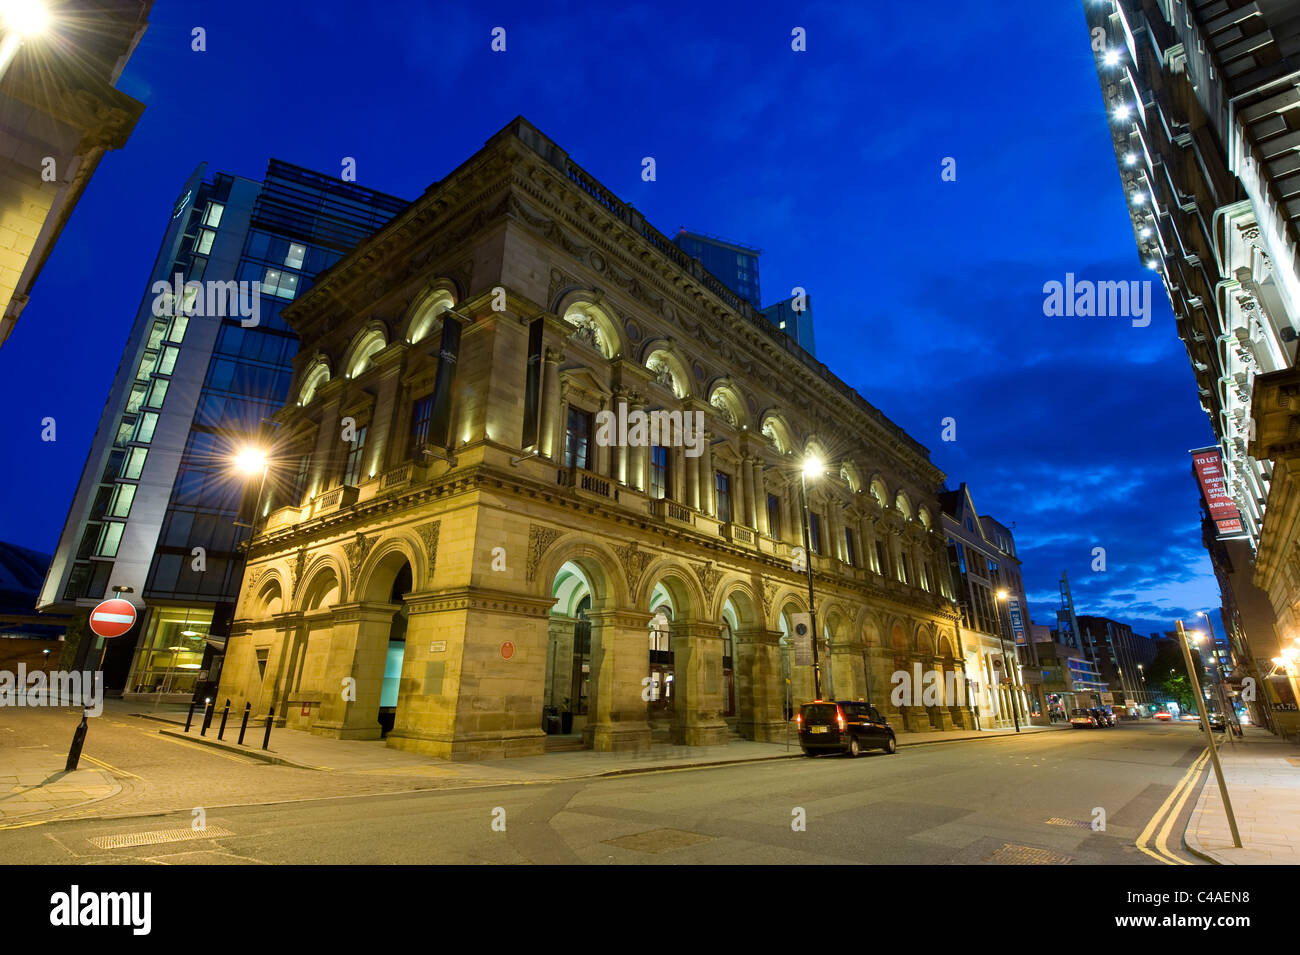 Le Free Trade Hall (Radisson Edwardian Hotel), Peter Street, Manchester. Banque D'Images